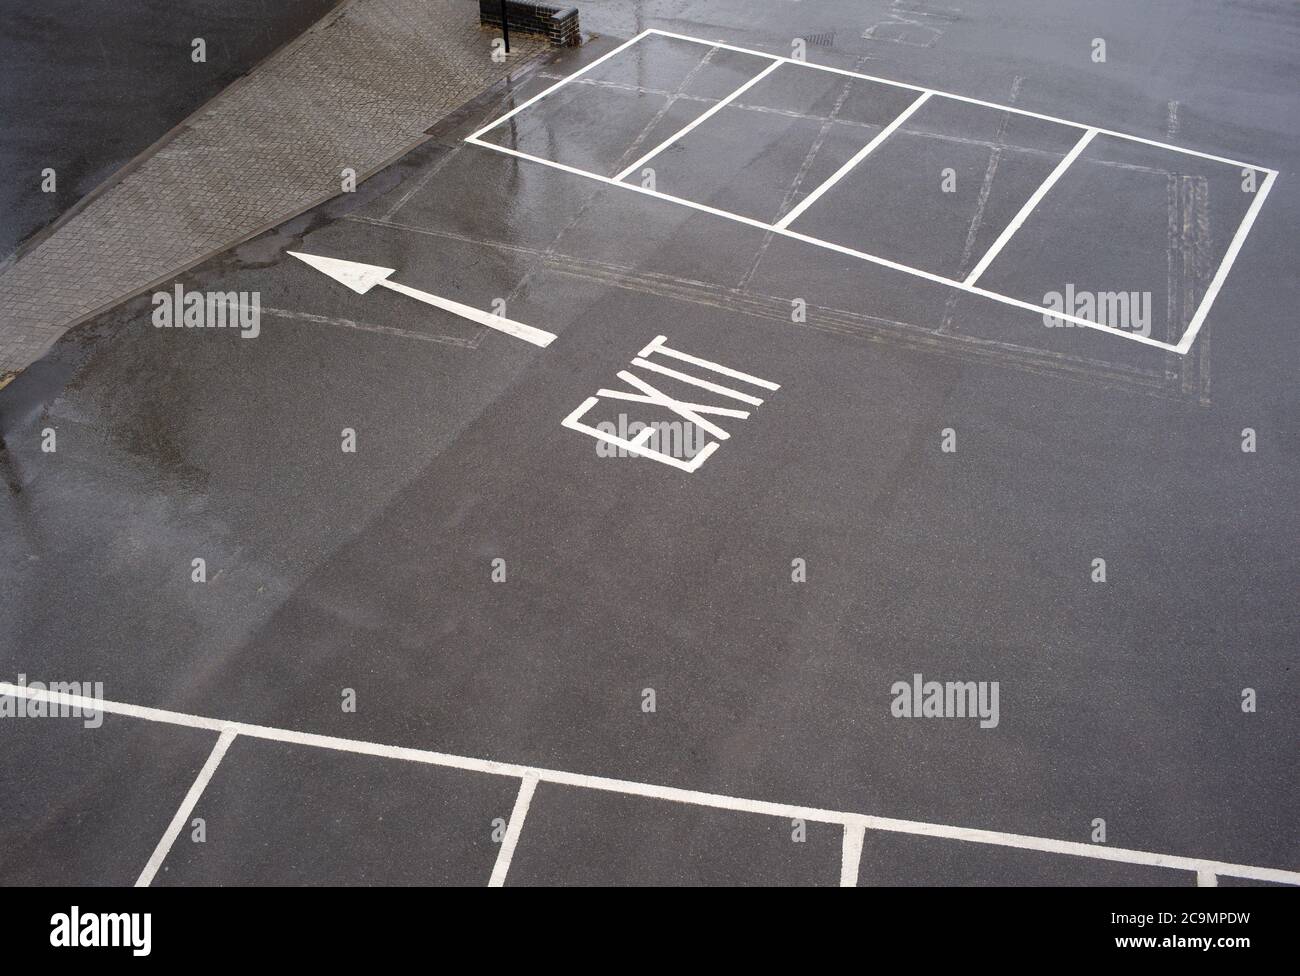 A concept image of an exit sign with an arrow taken from above on the pavement of an outside empty car park showing the exit and empty spaces. Stock Photo